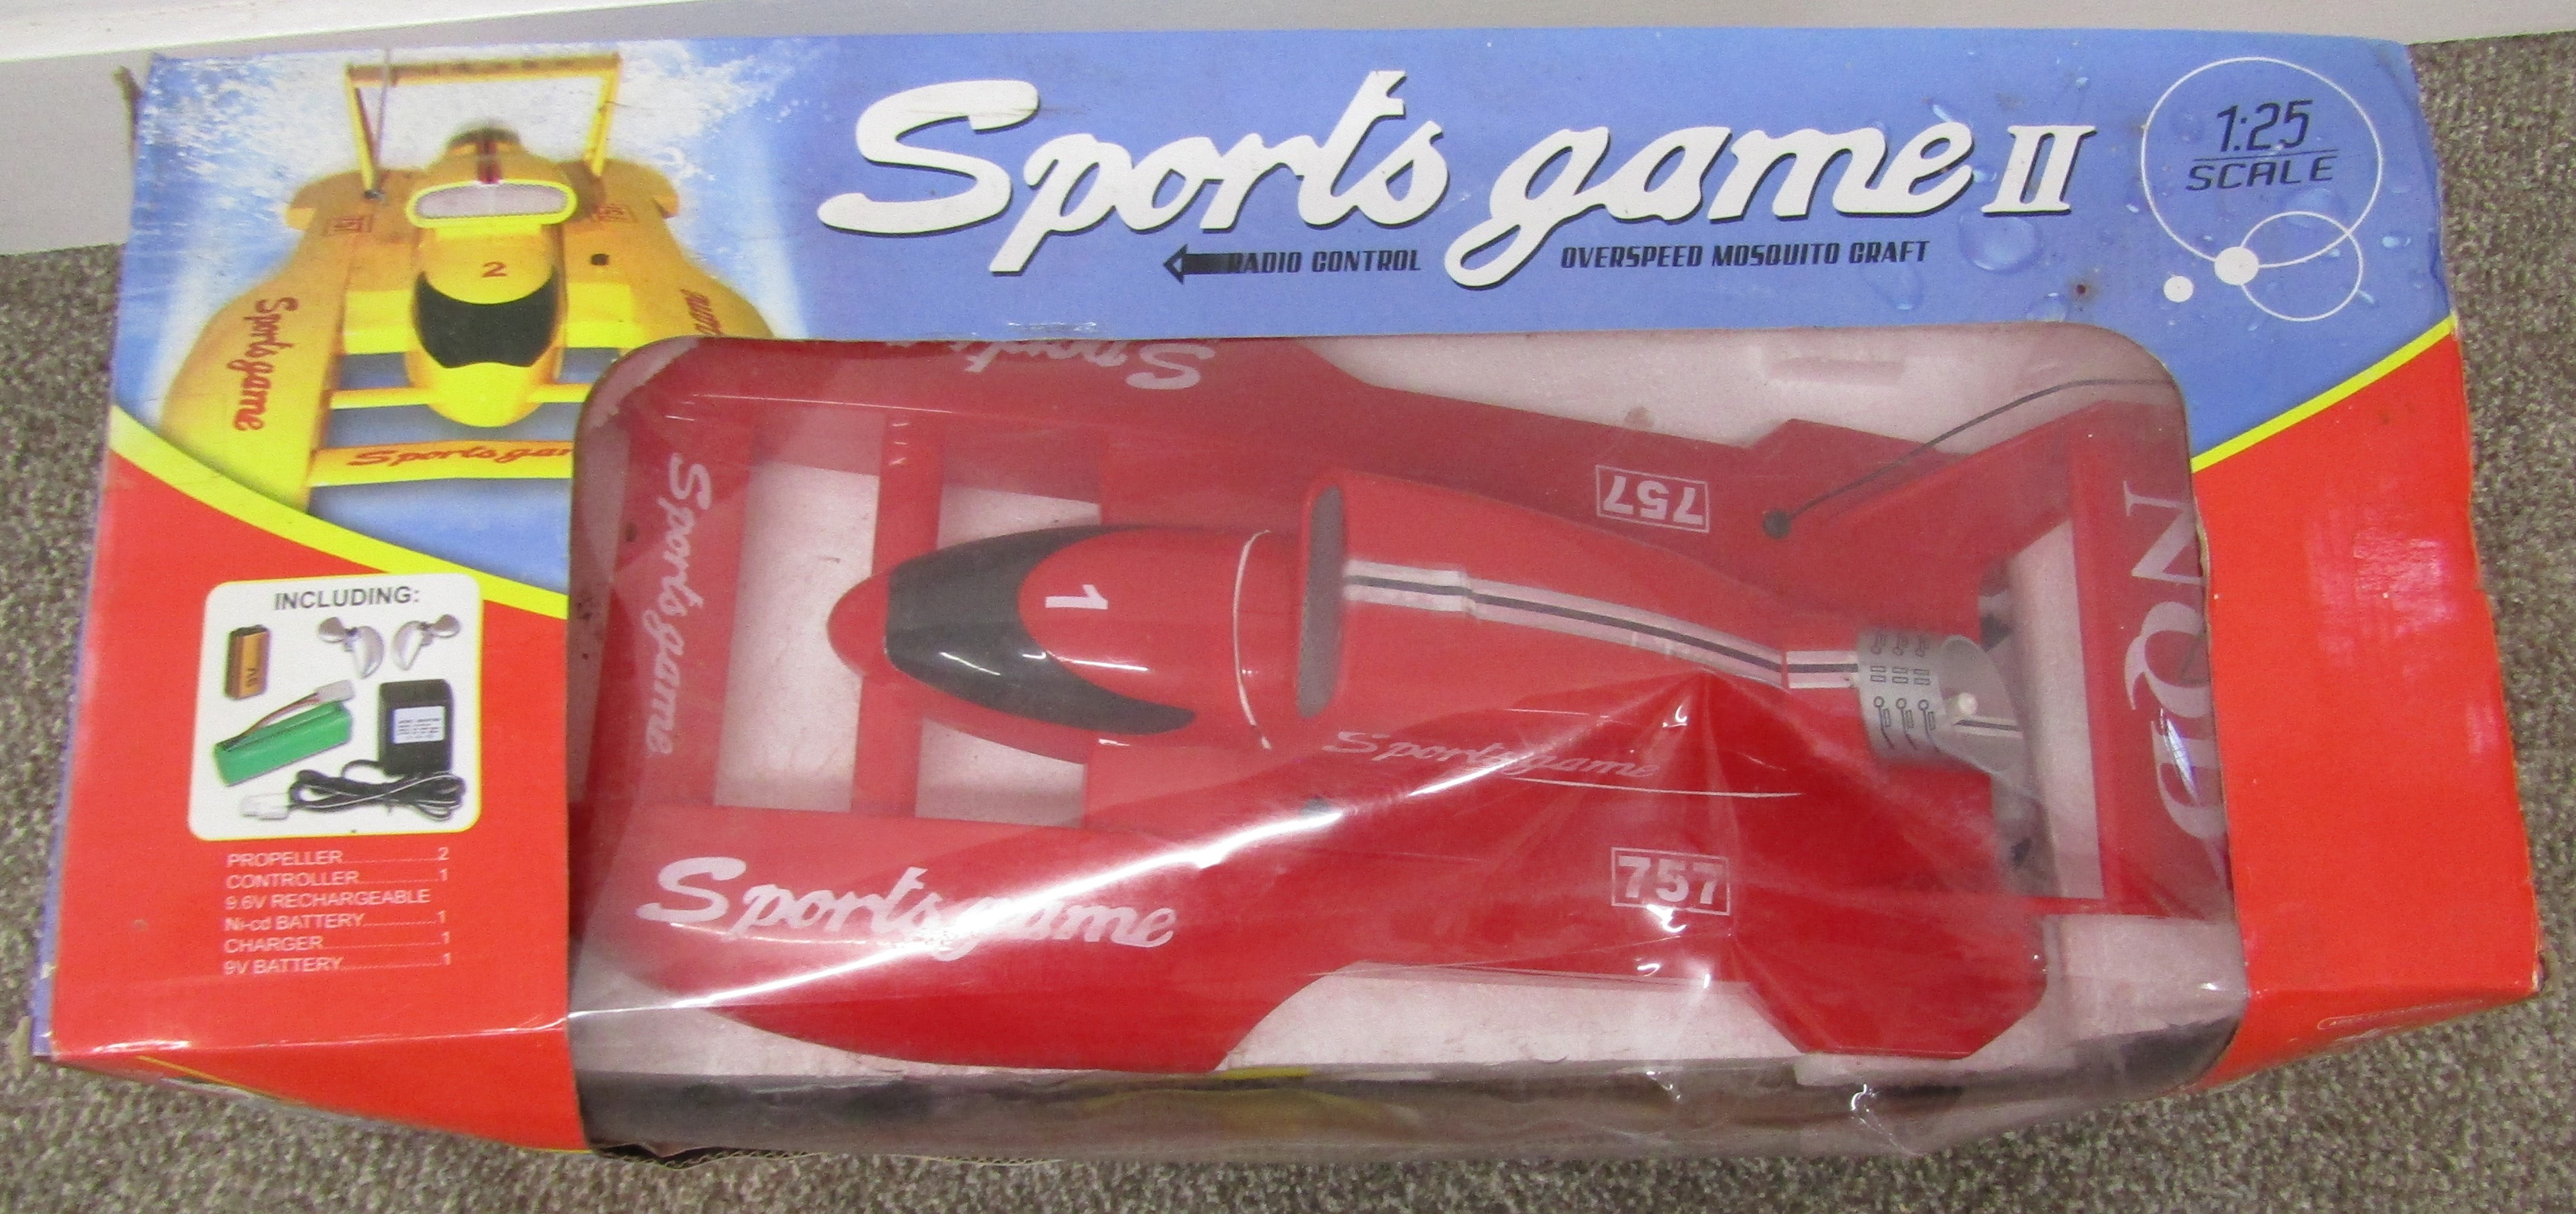 Sports Game II 757 remote control hydroplane and wooden model of Sardinal - Image 3 of 4